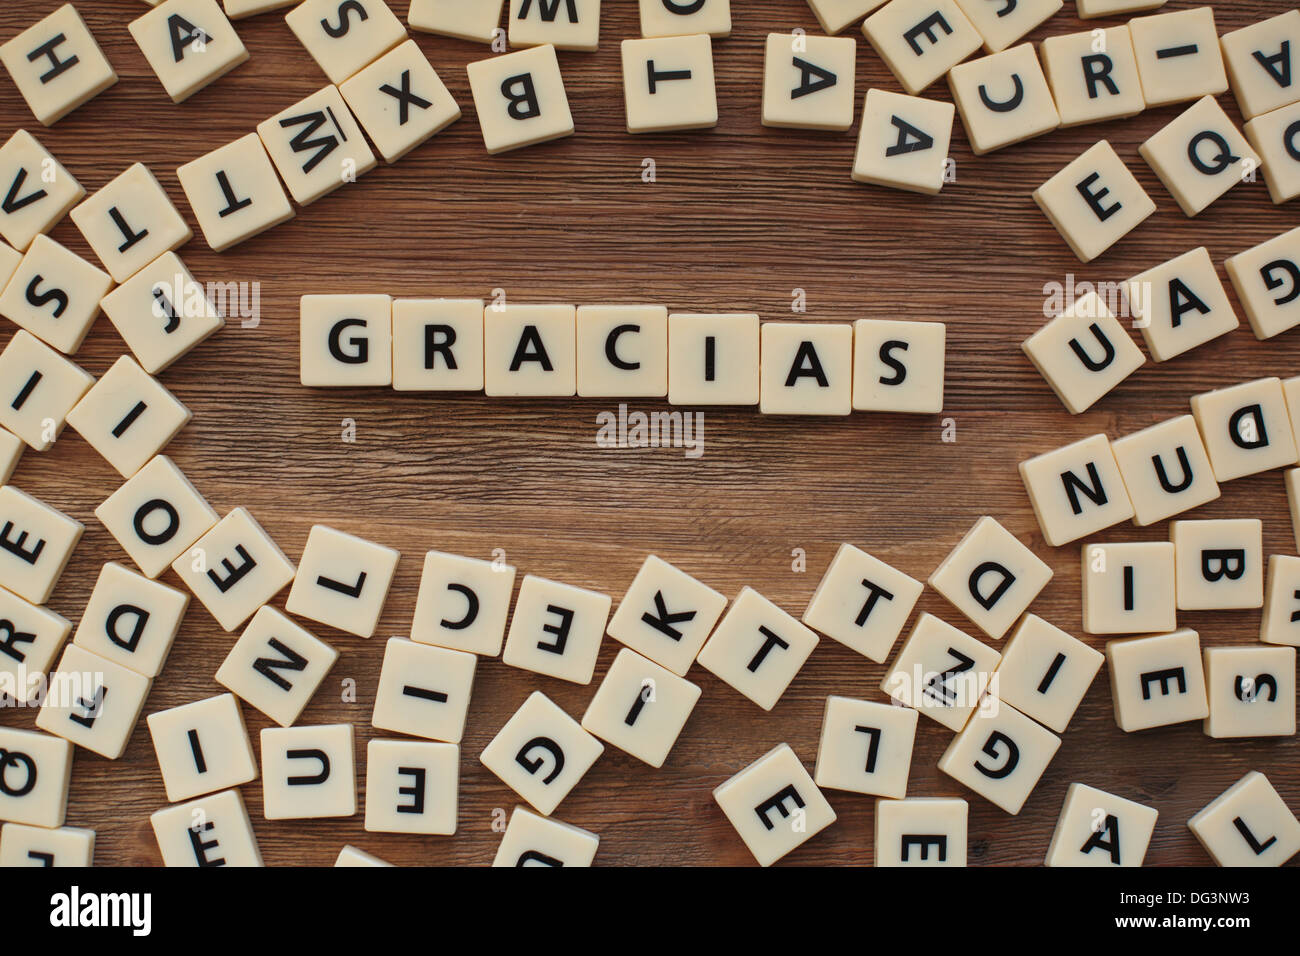 Plastic letters from a childrens' spelling game on a wooden table spell 'Gracias' Stock Photo